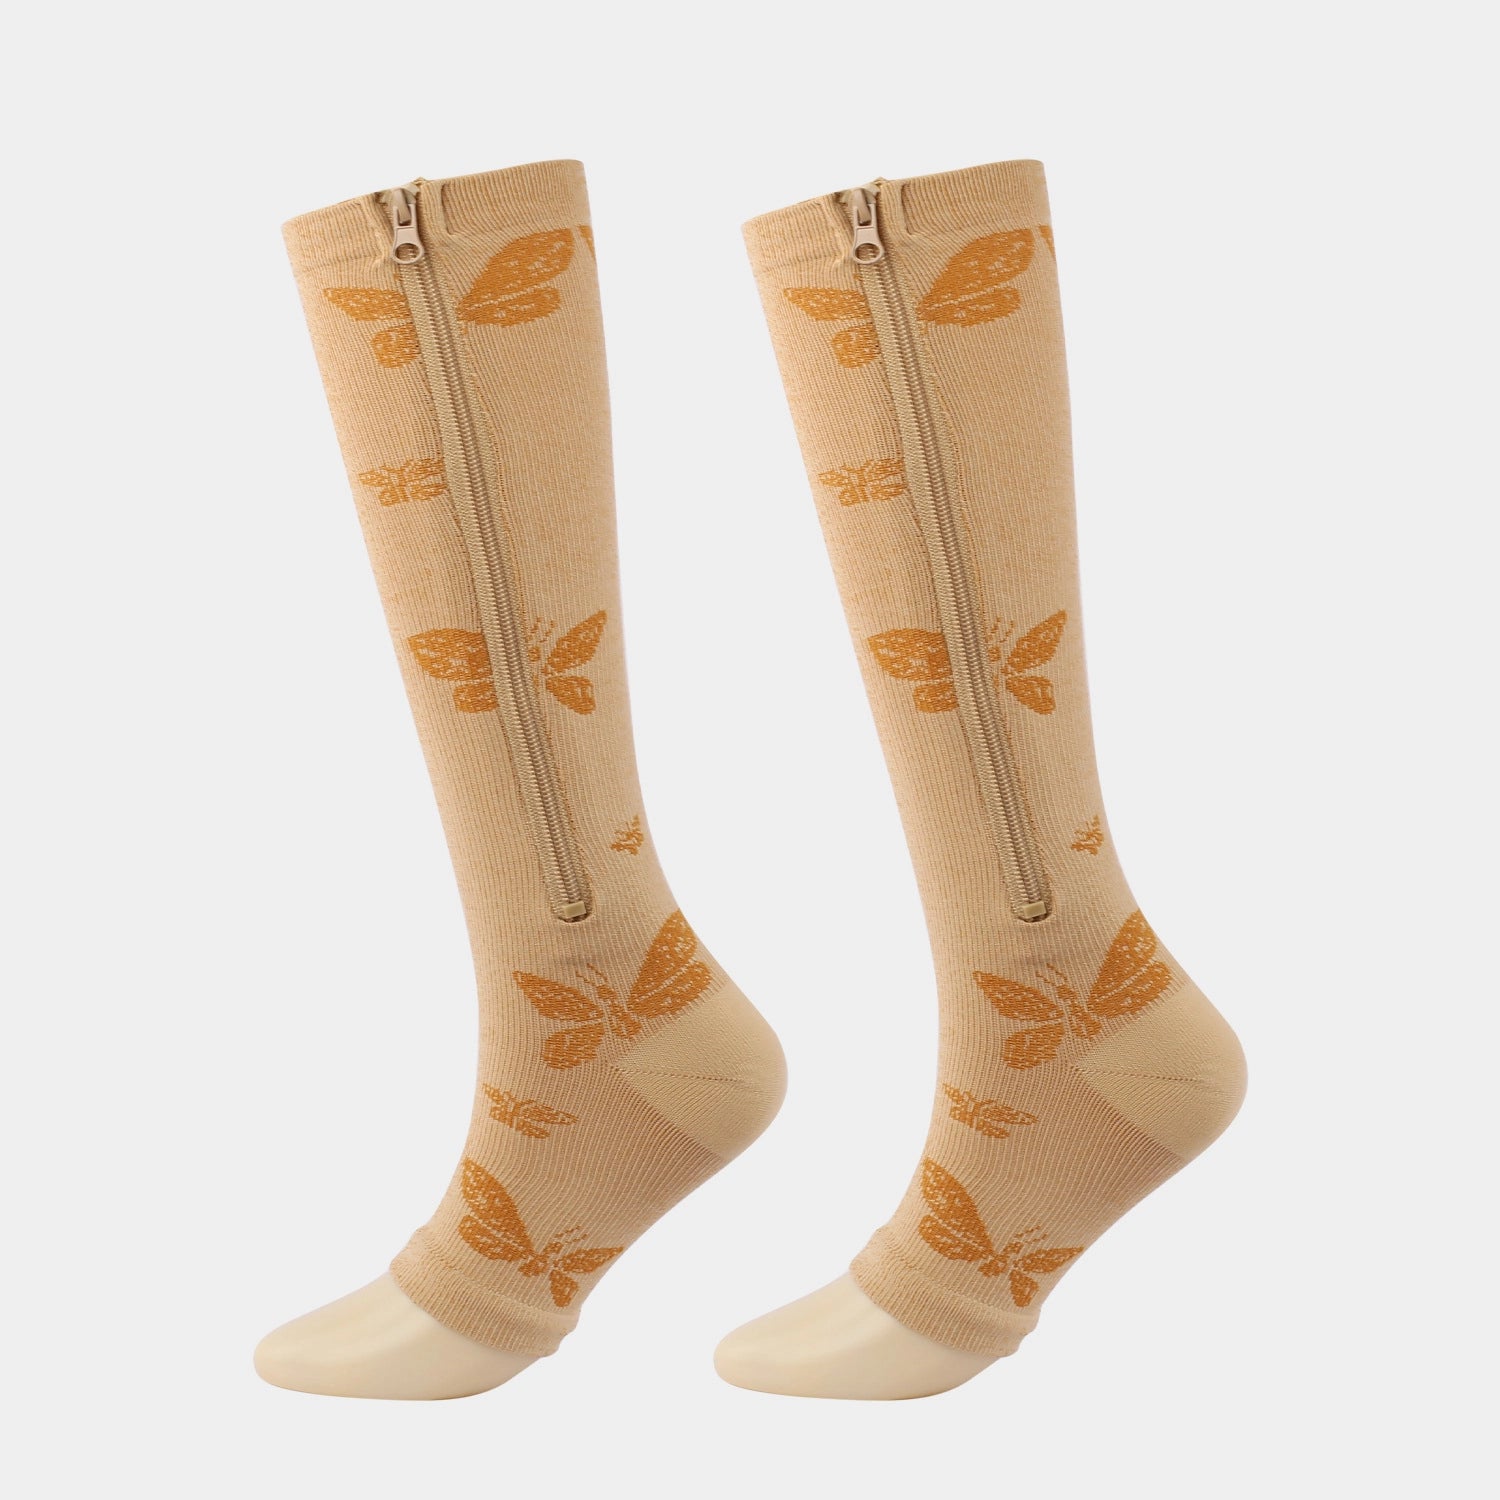 Copper Zipper Compression Socks - Zip Up Support Stockings ~ Easy to Wear!